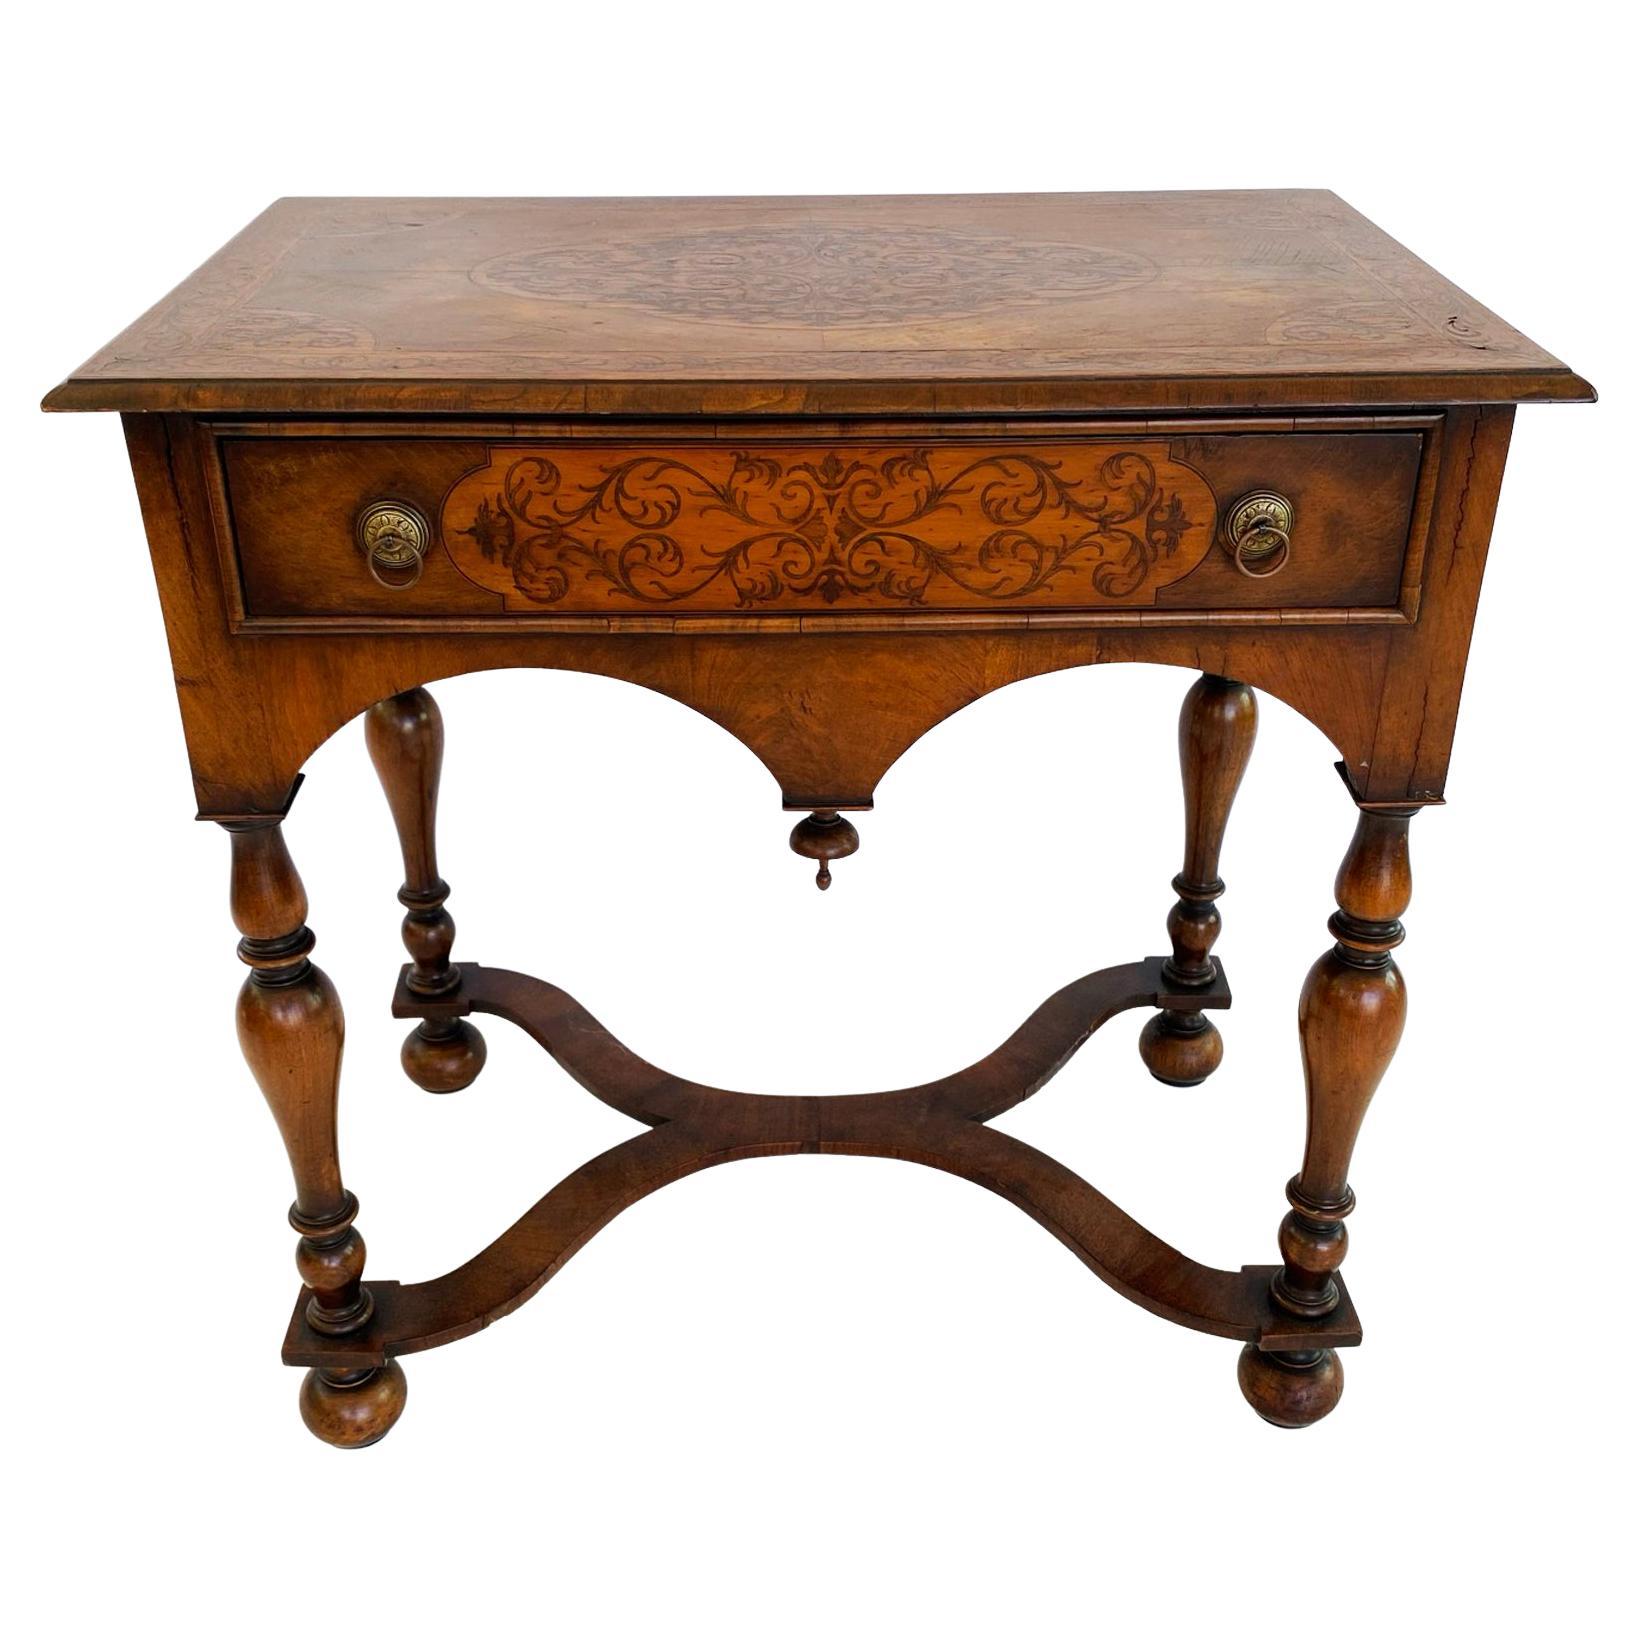 English Walnut Lowboy with Seaweed Marquetry Inlay and Cross Banded Top